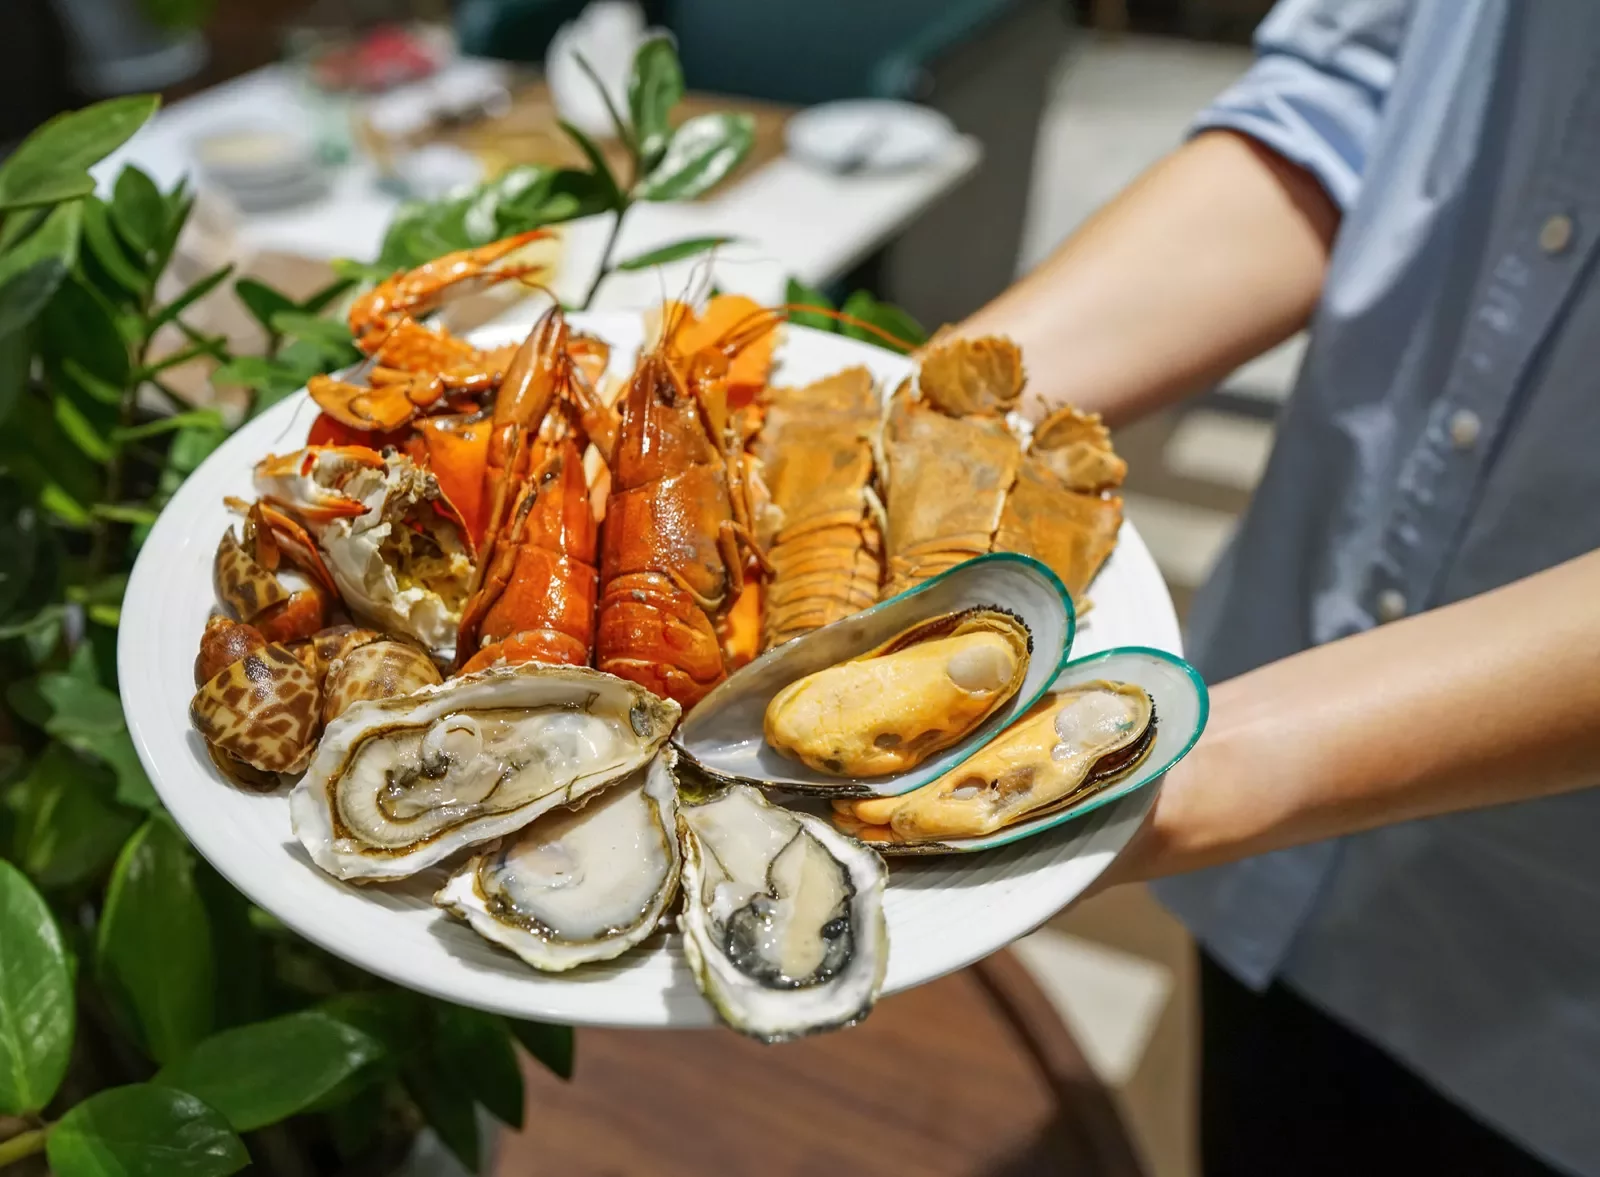 An assortment plate of mussels, oysters, lobsters and other seafood